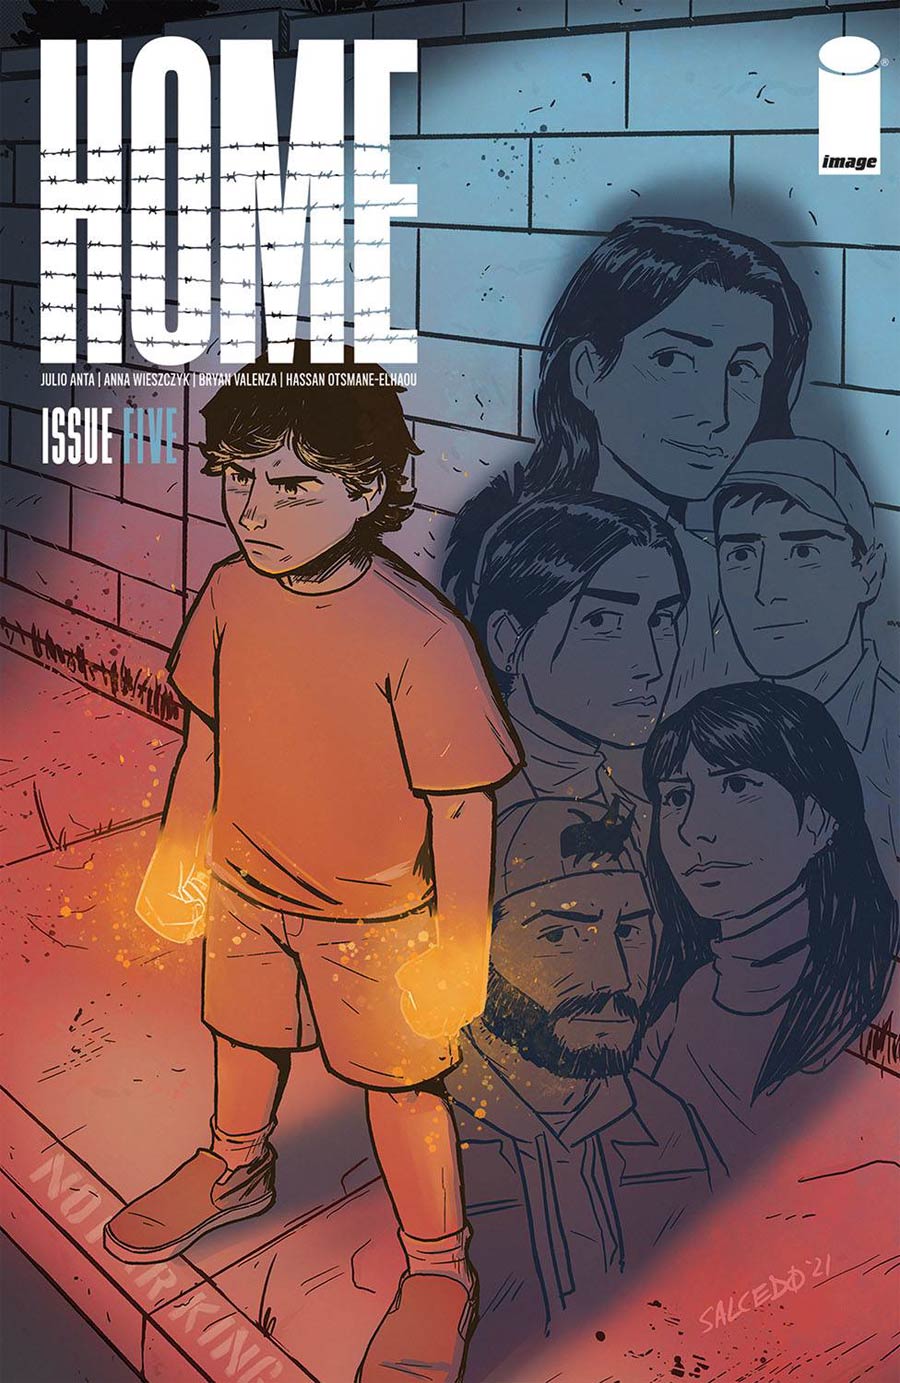 Home (Image Comics) #5 Cover B Variant Jacoby Salcedo Cover